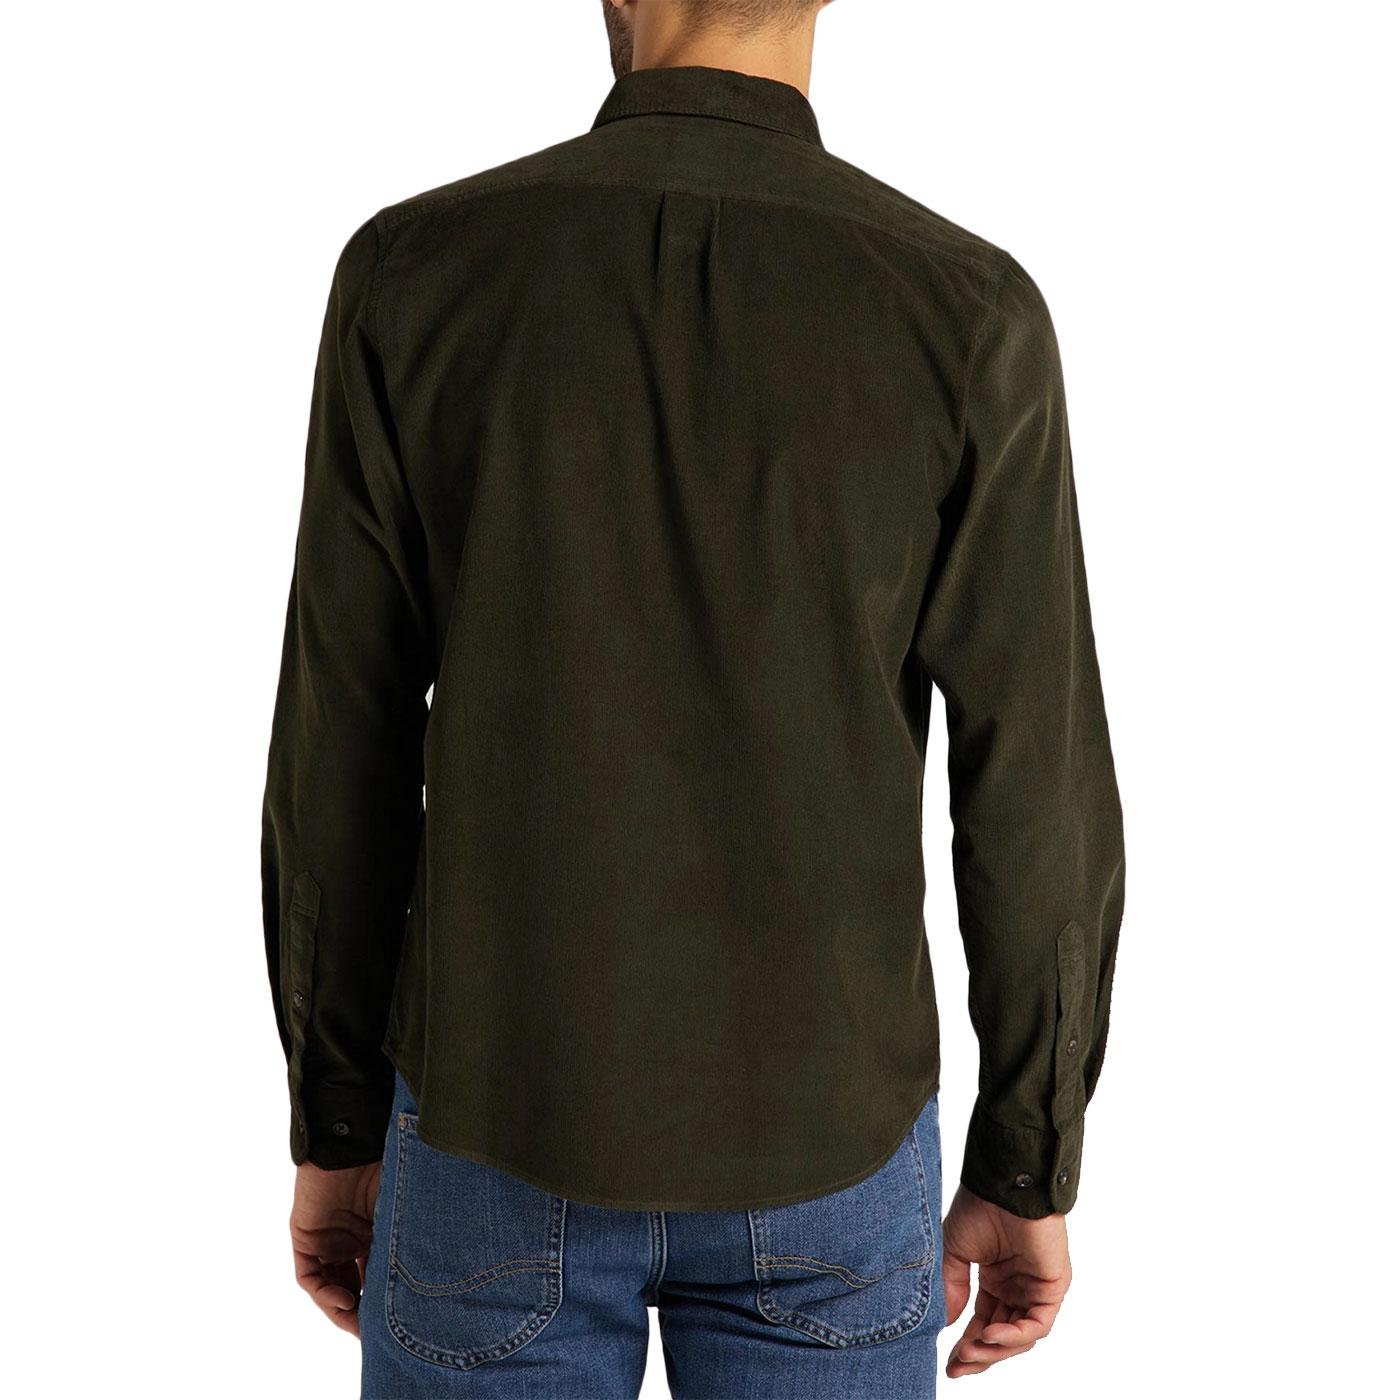 Lee Jeans Mod Button Down Cord Shirt in Serpico Green